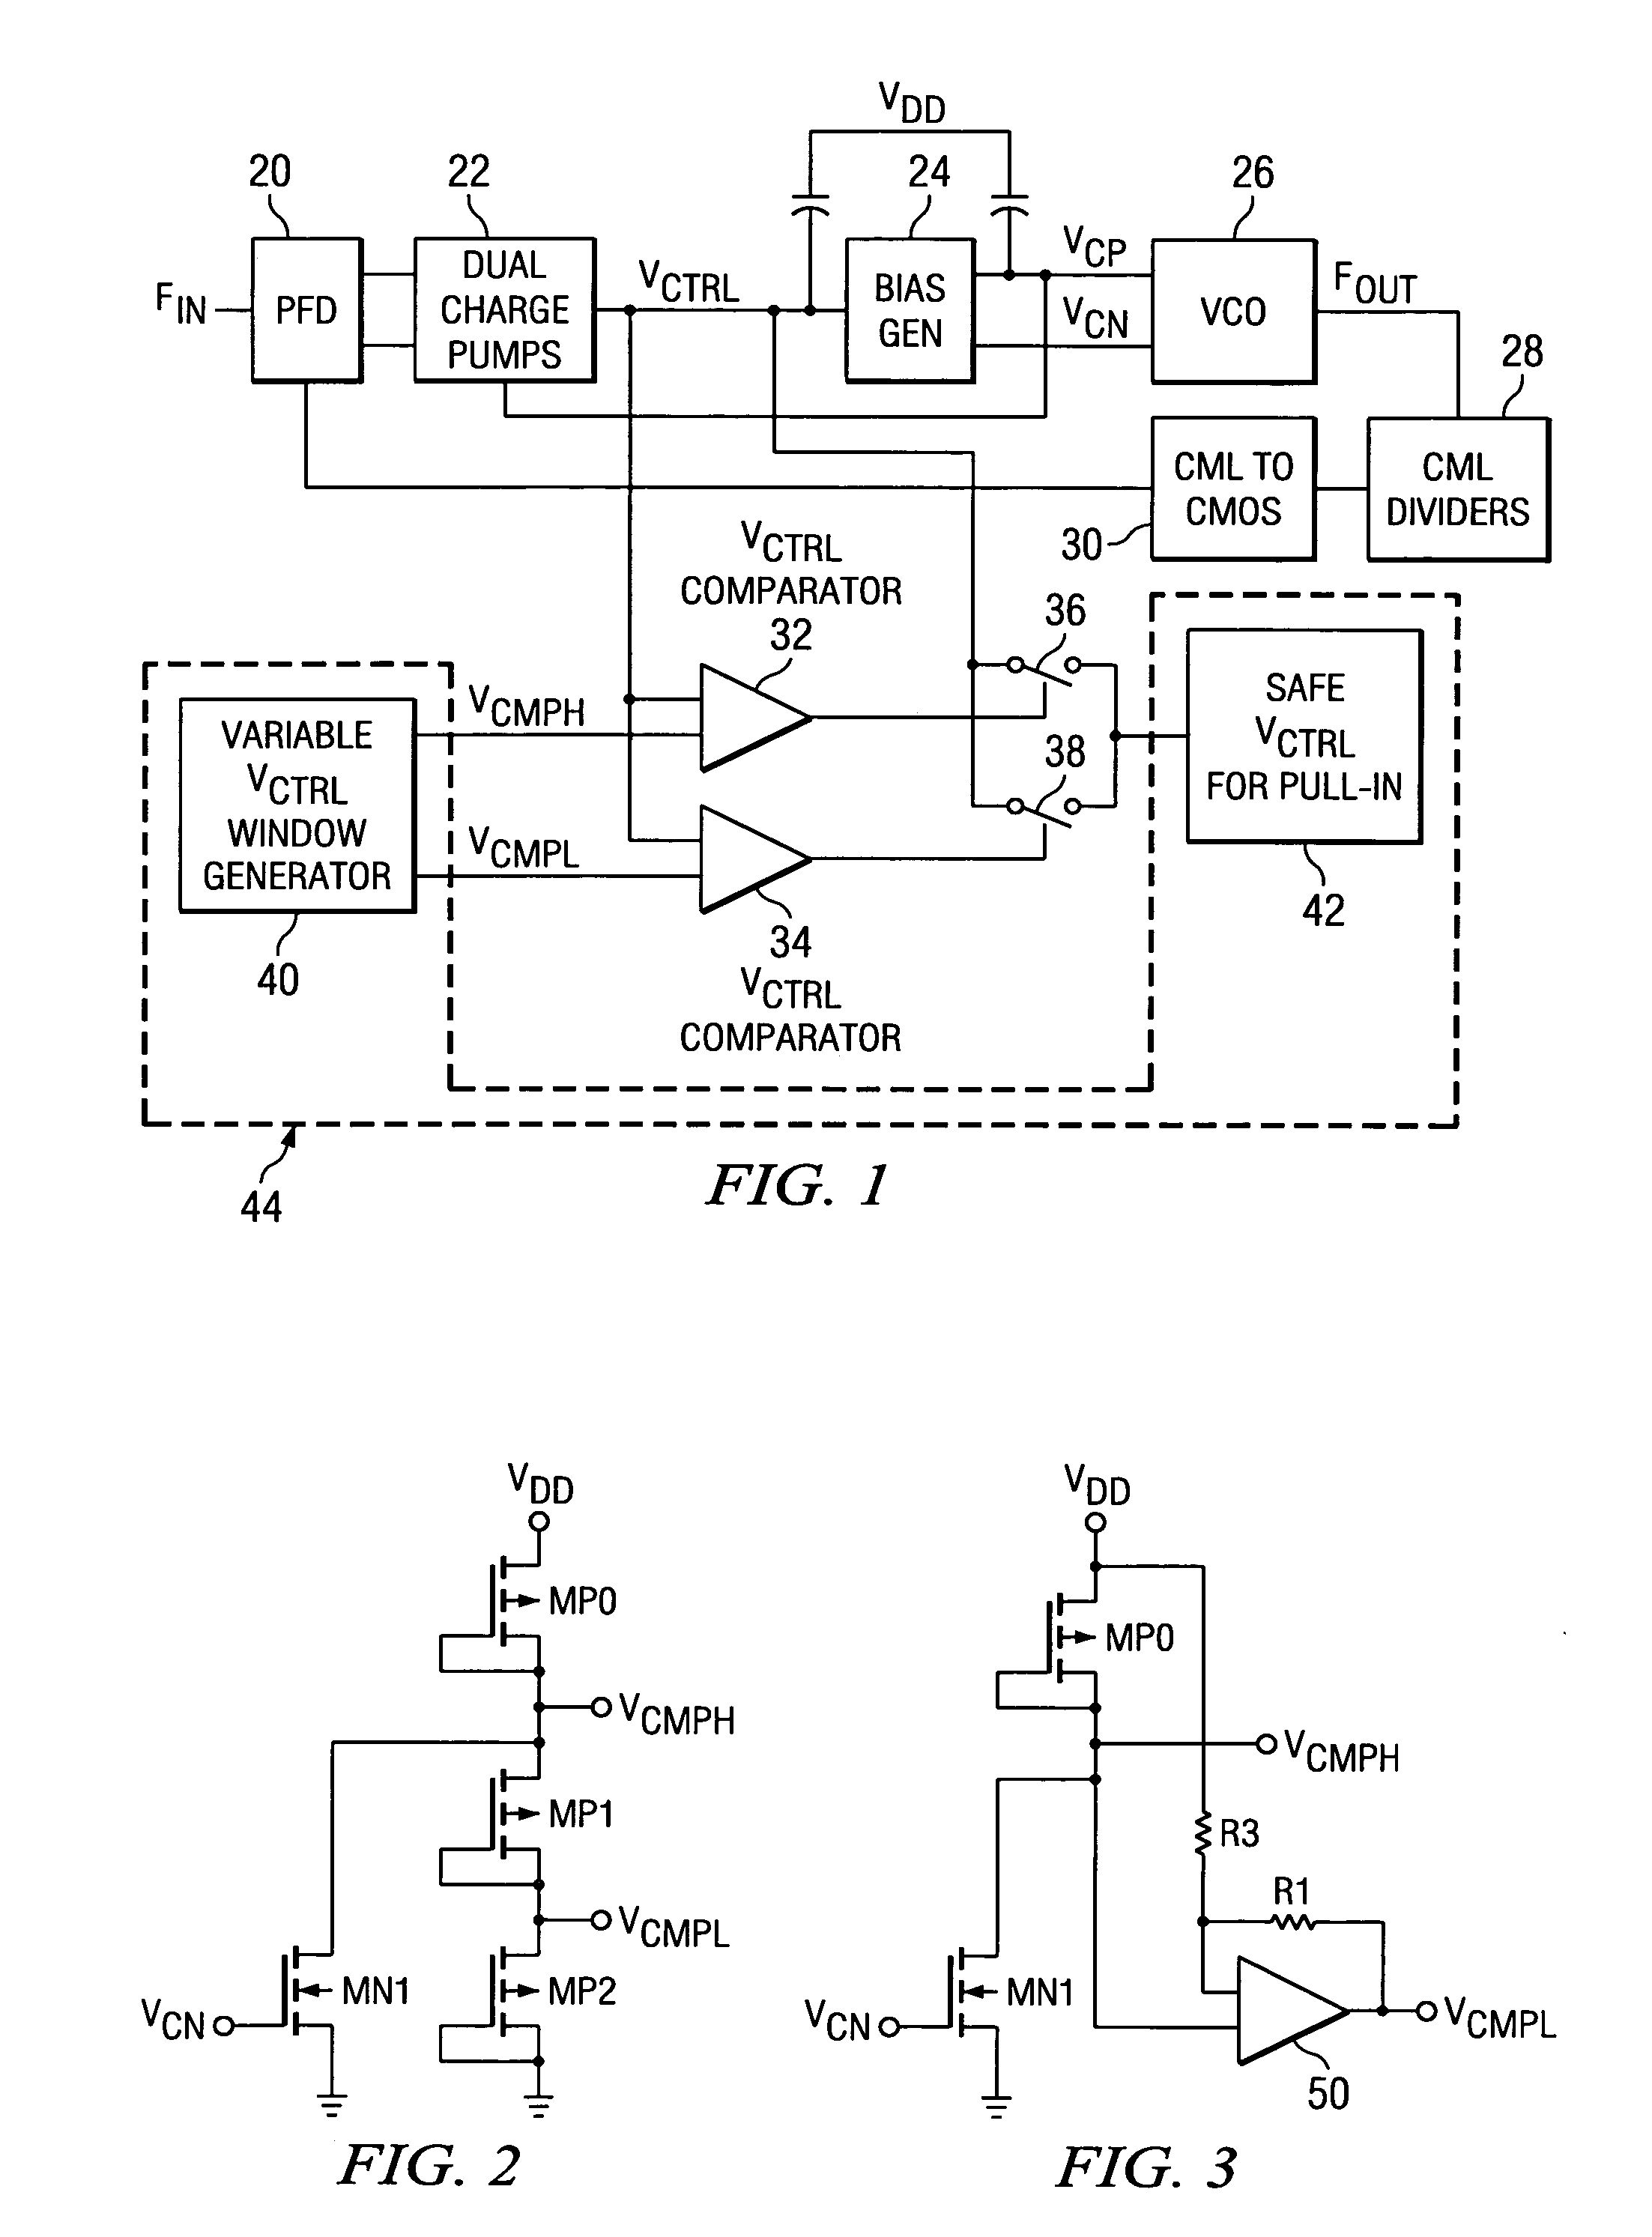 Process tracking limiter for VCO control voltages